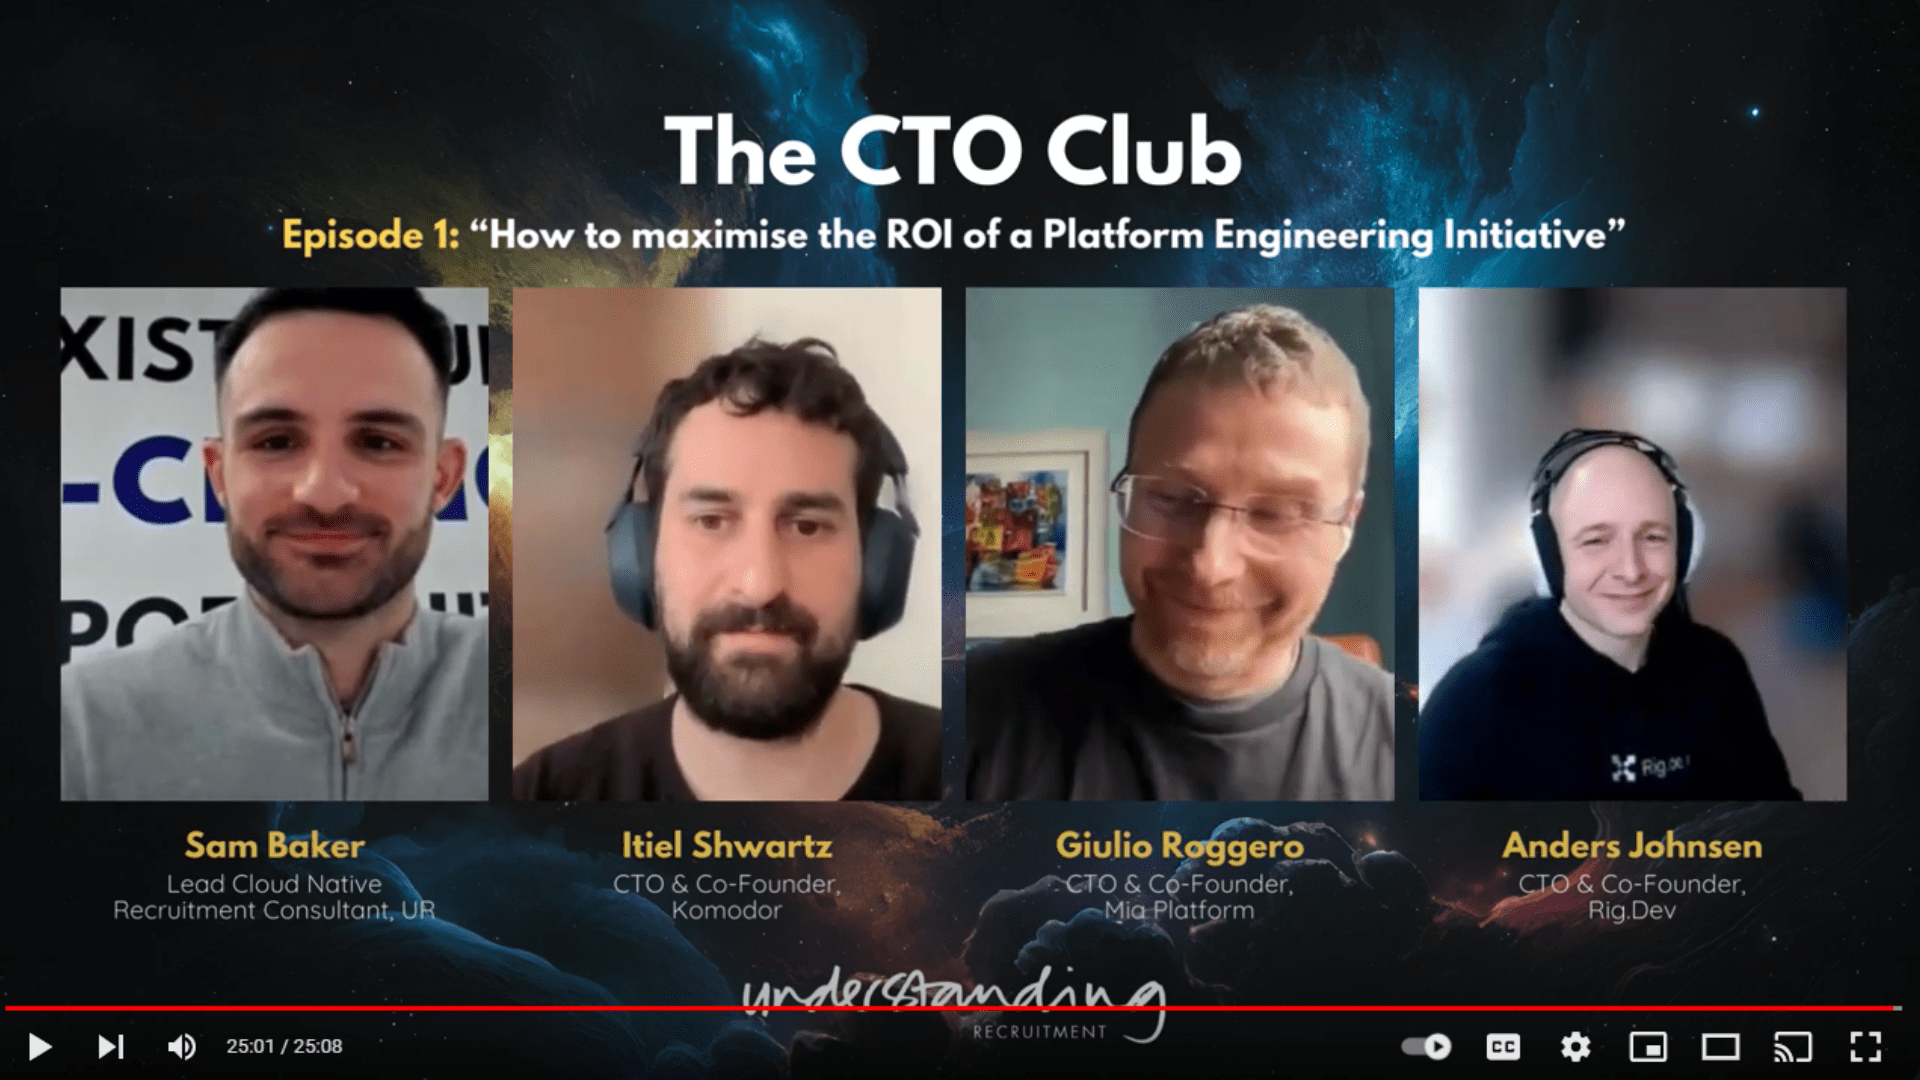 The CTO Club Episode 1: How to Maximise the ROI of a Platform Engineering Initiative